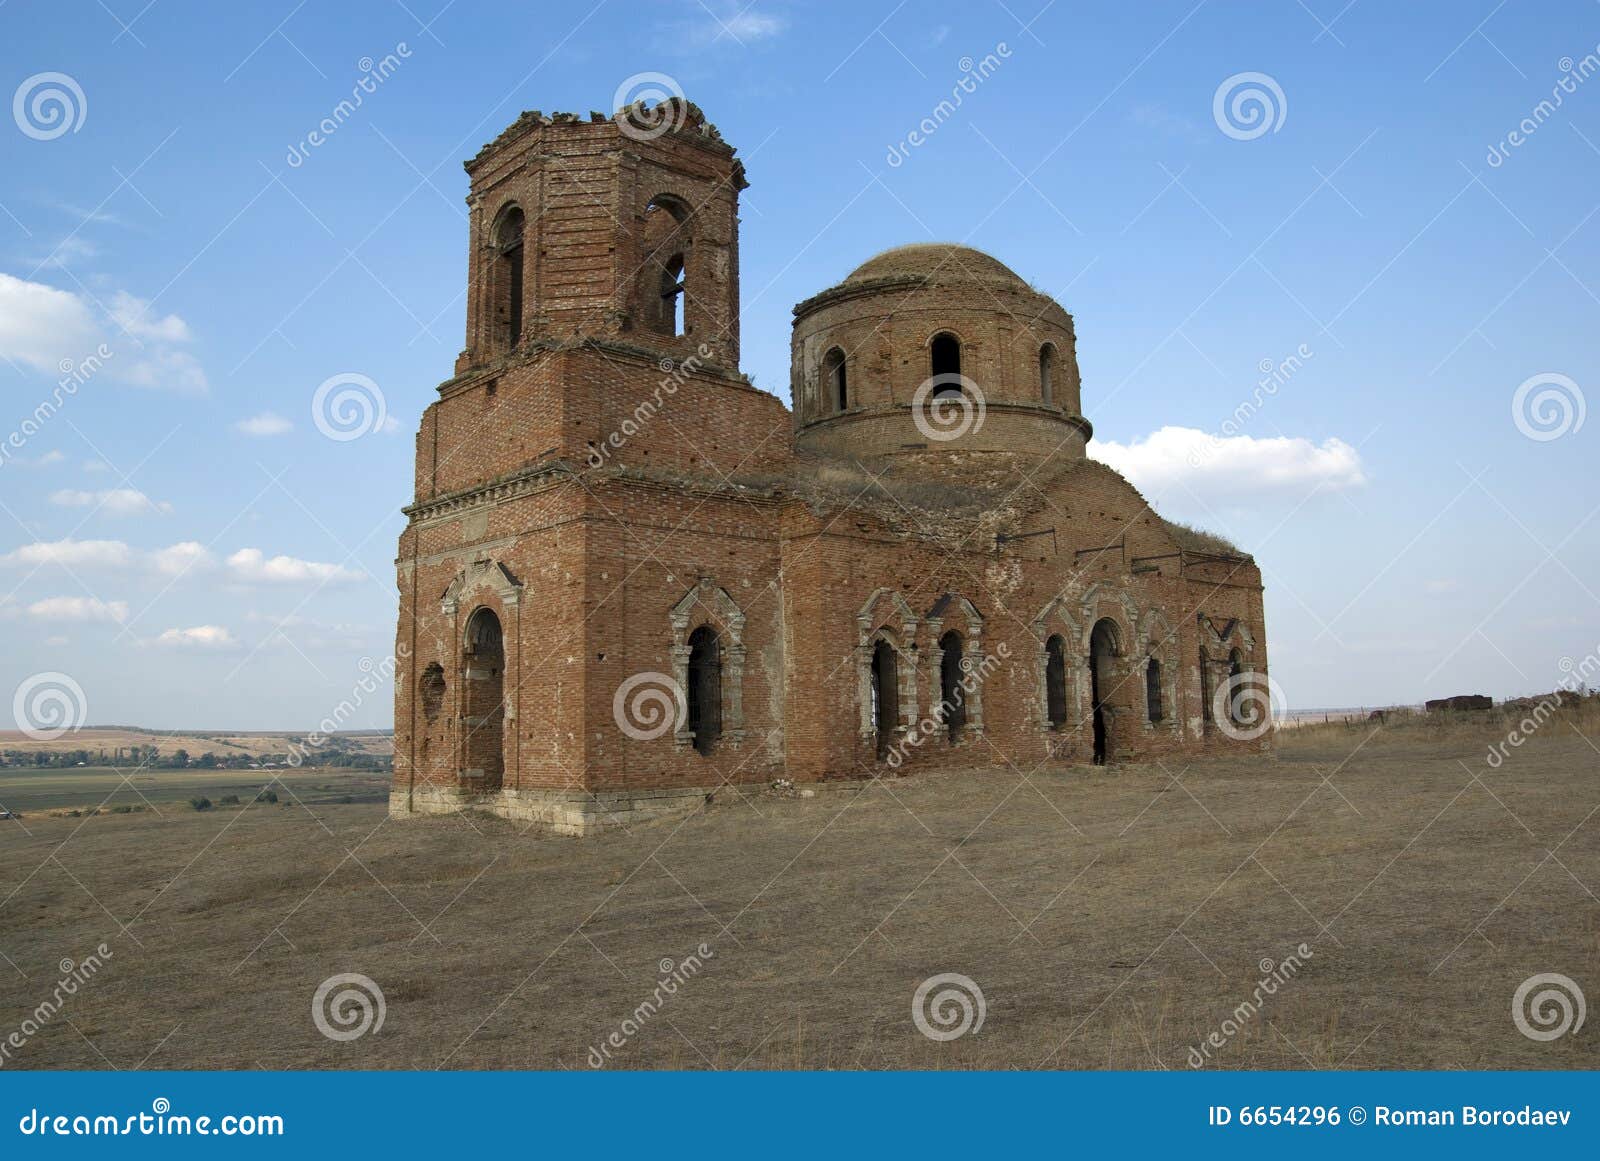 old church destroyed during wo. rostov-on-don, rus